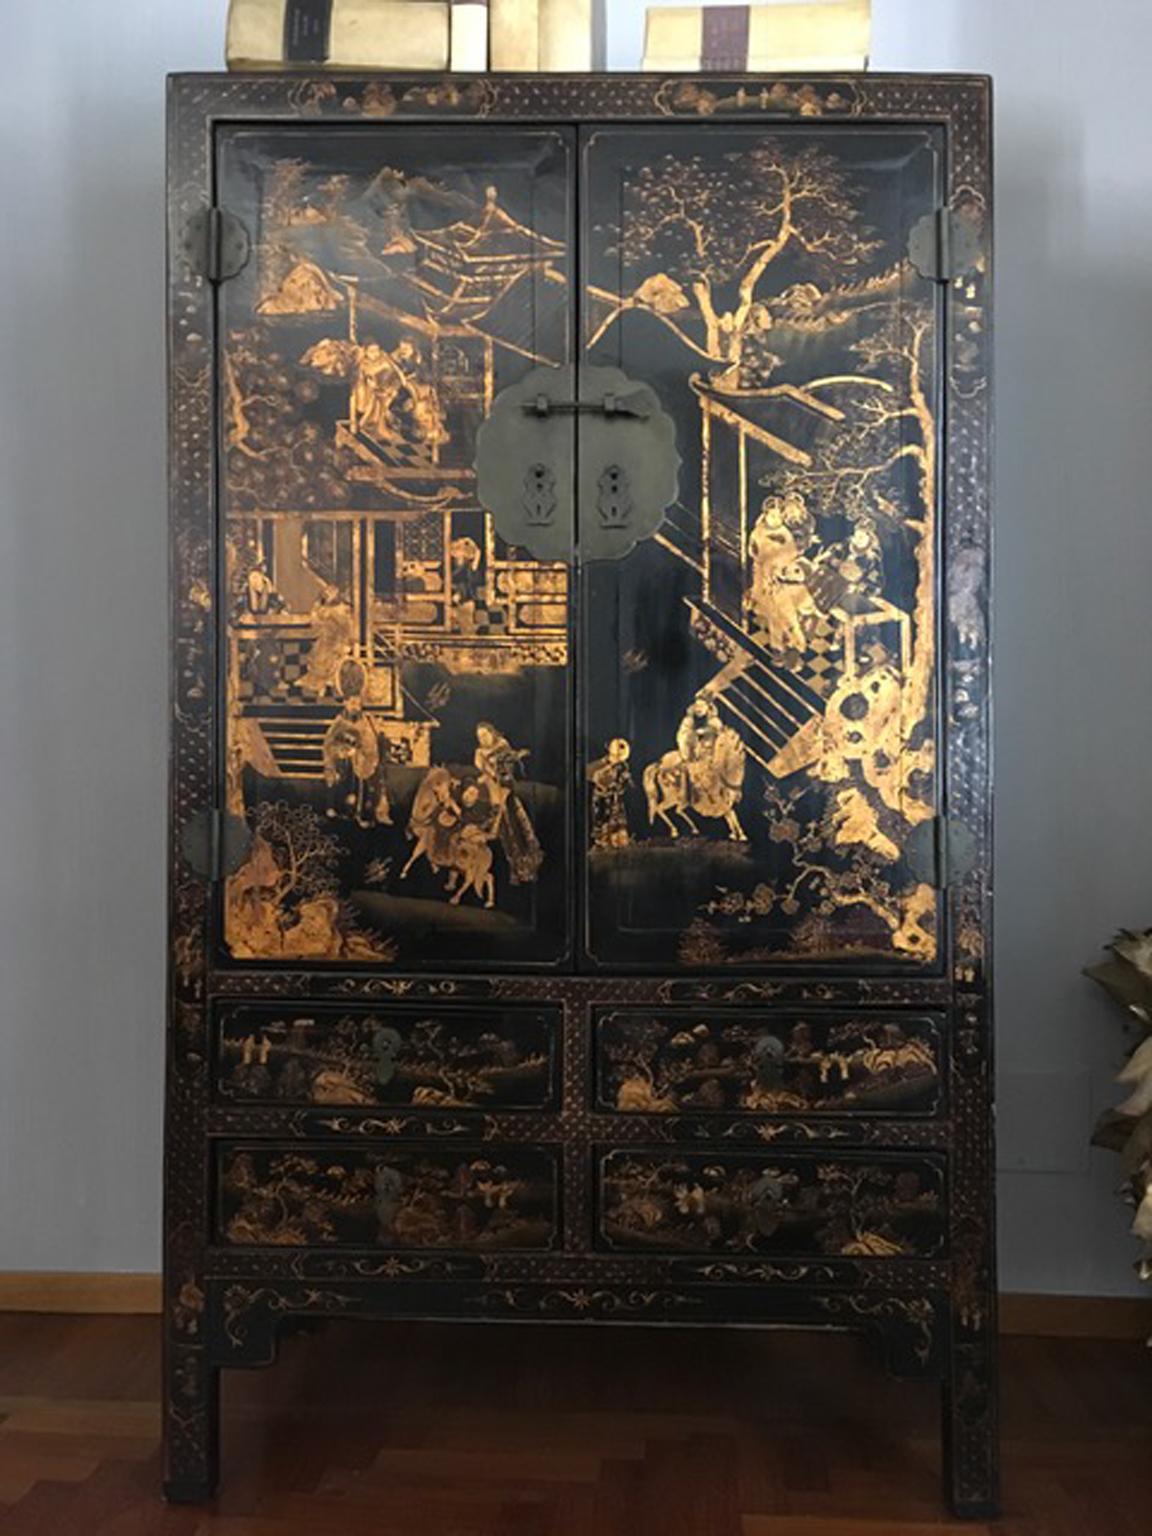 This beautiful cabinet or secretaire is decorated with magnificent Chinese landscape.
The drawings in gold has a timeless elegance and the black lacquer makes this piece a very contemporary presence.

Recently restored, the details of the handles